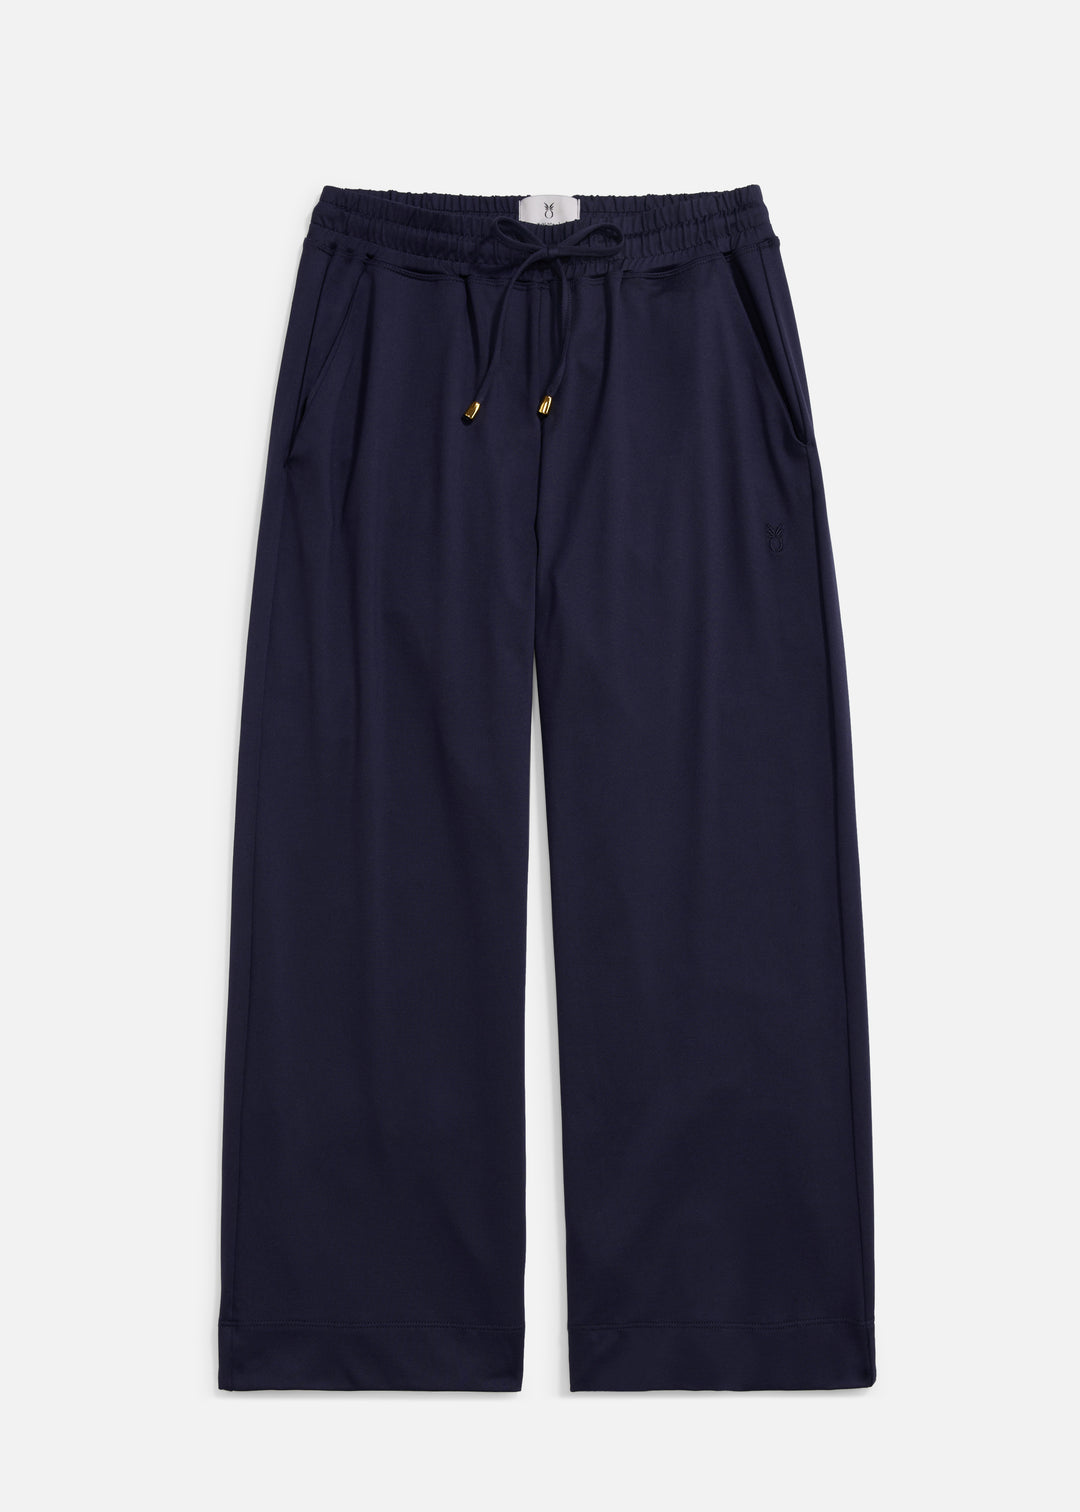 Palisades Pant in Repreve® Stretch (Navy)